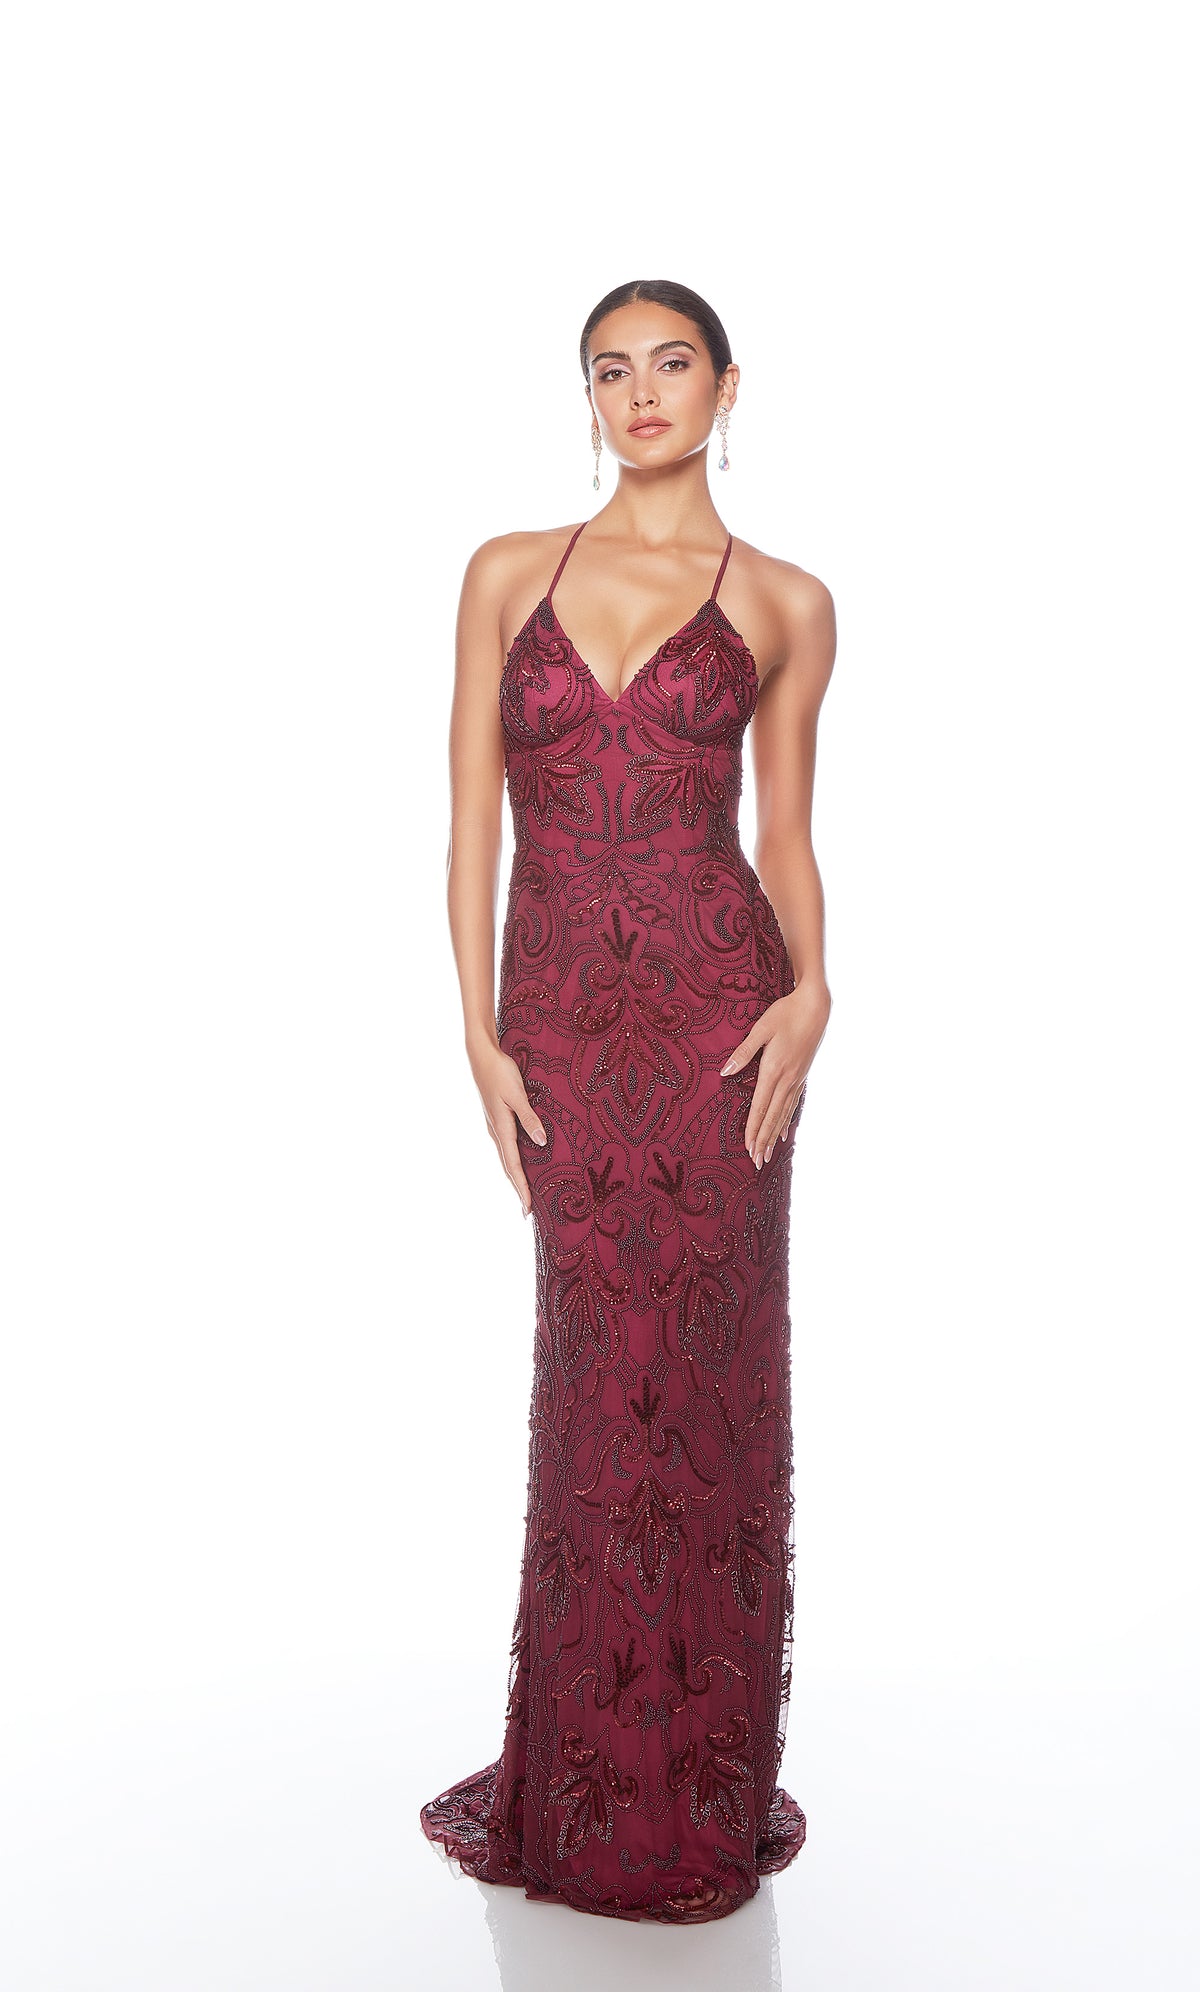 Elegant red formal gown: Hand-beaded, V neckline, spaghetti straps, strappy back, and intricate floral design for an chic and sophisticated look.